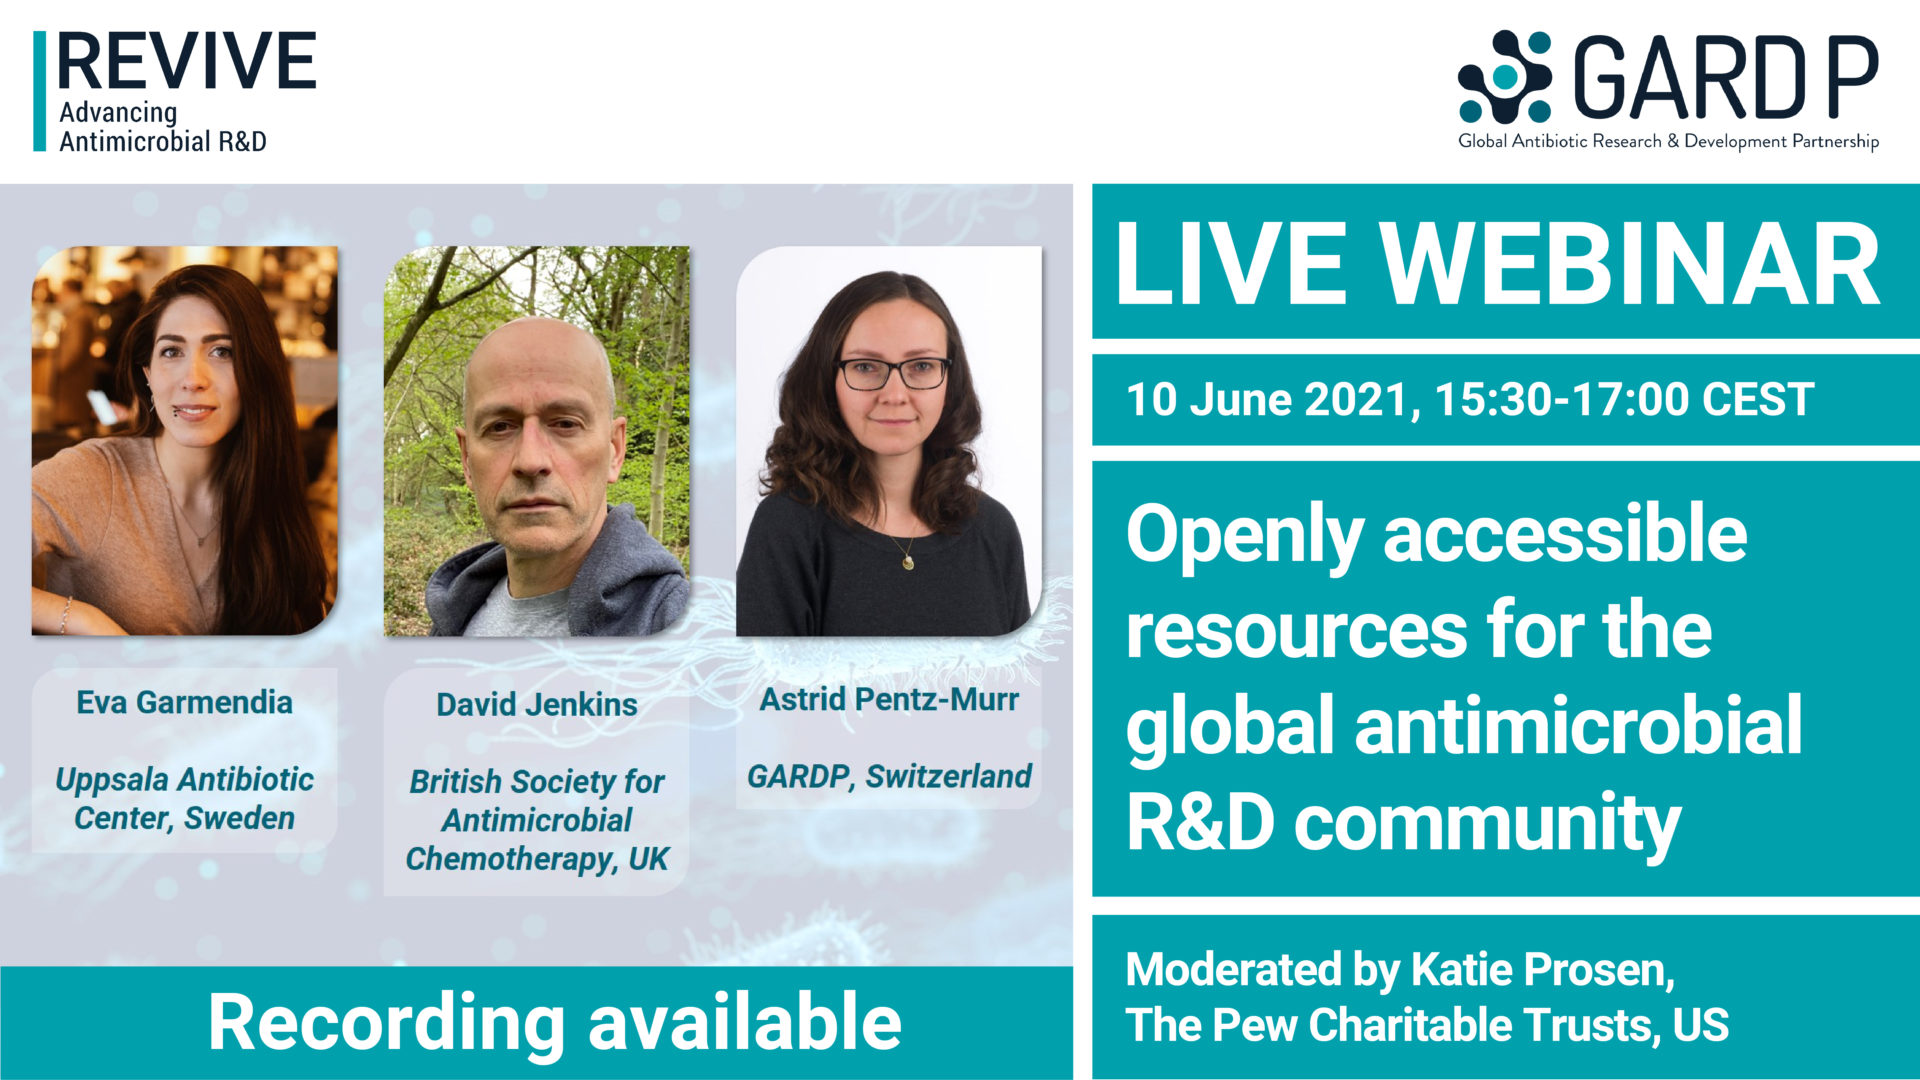 Openly accessible resources for the global antimicrobial R&D community